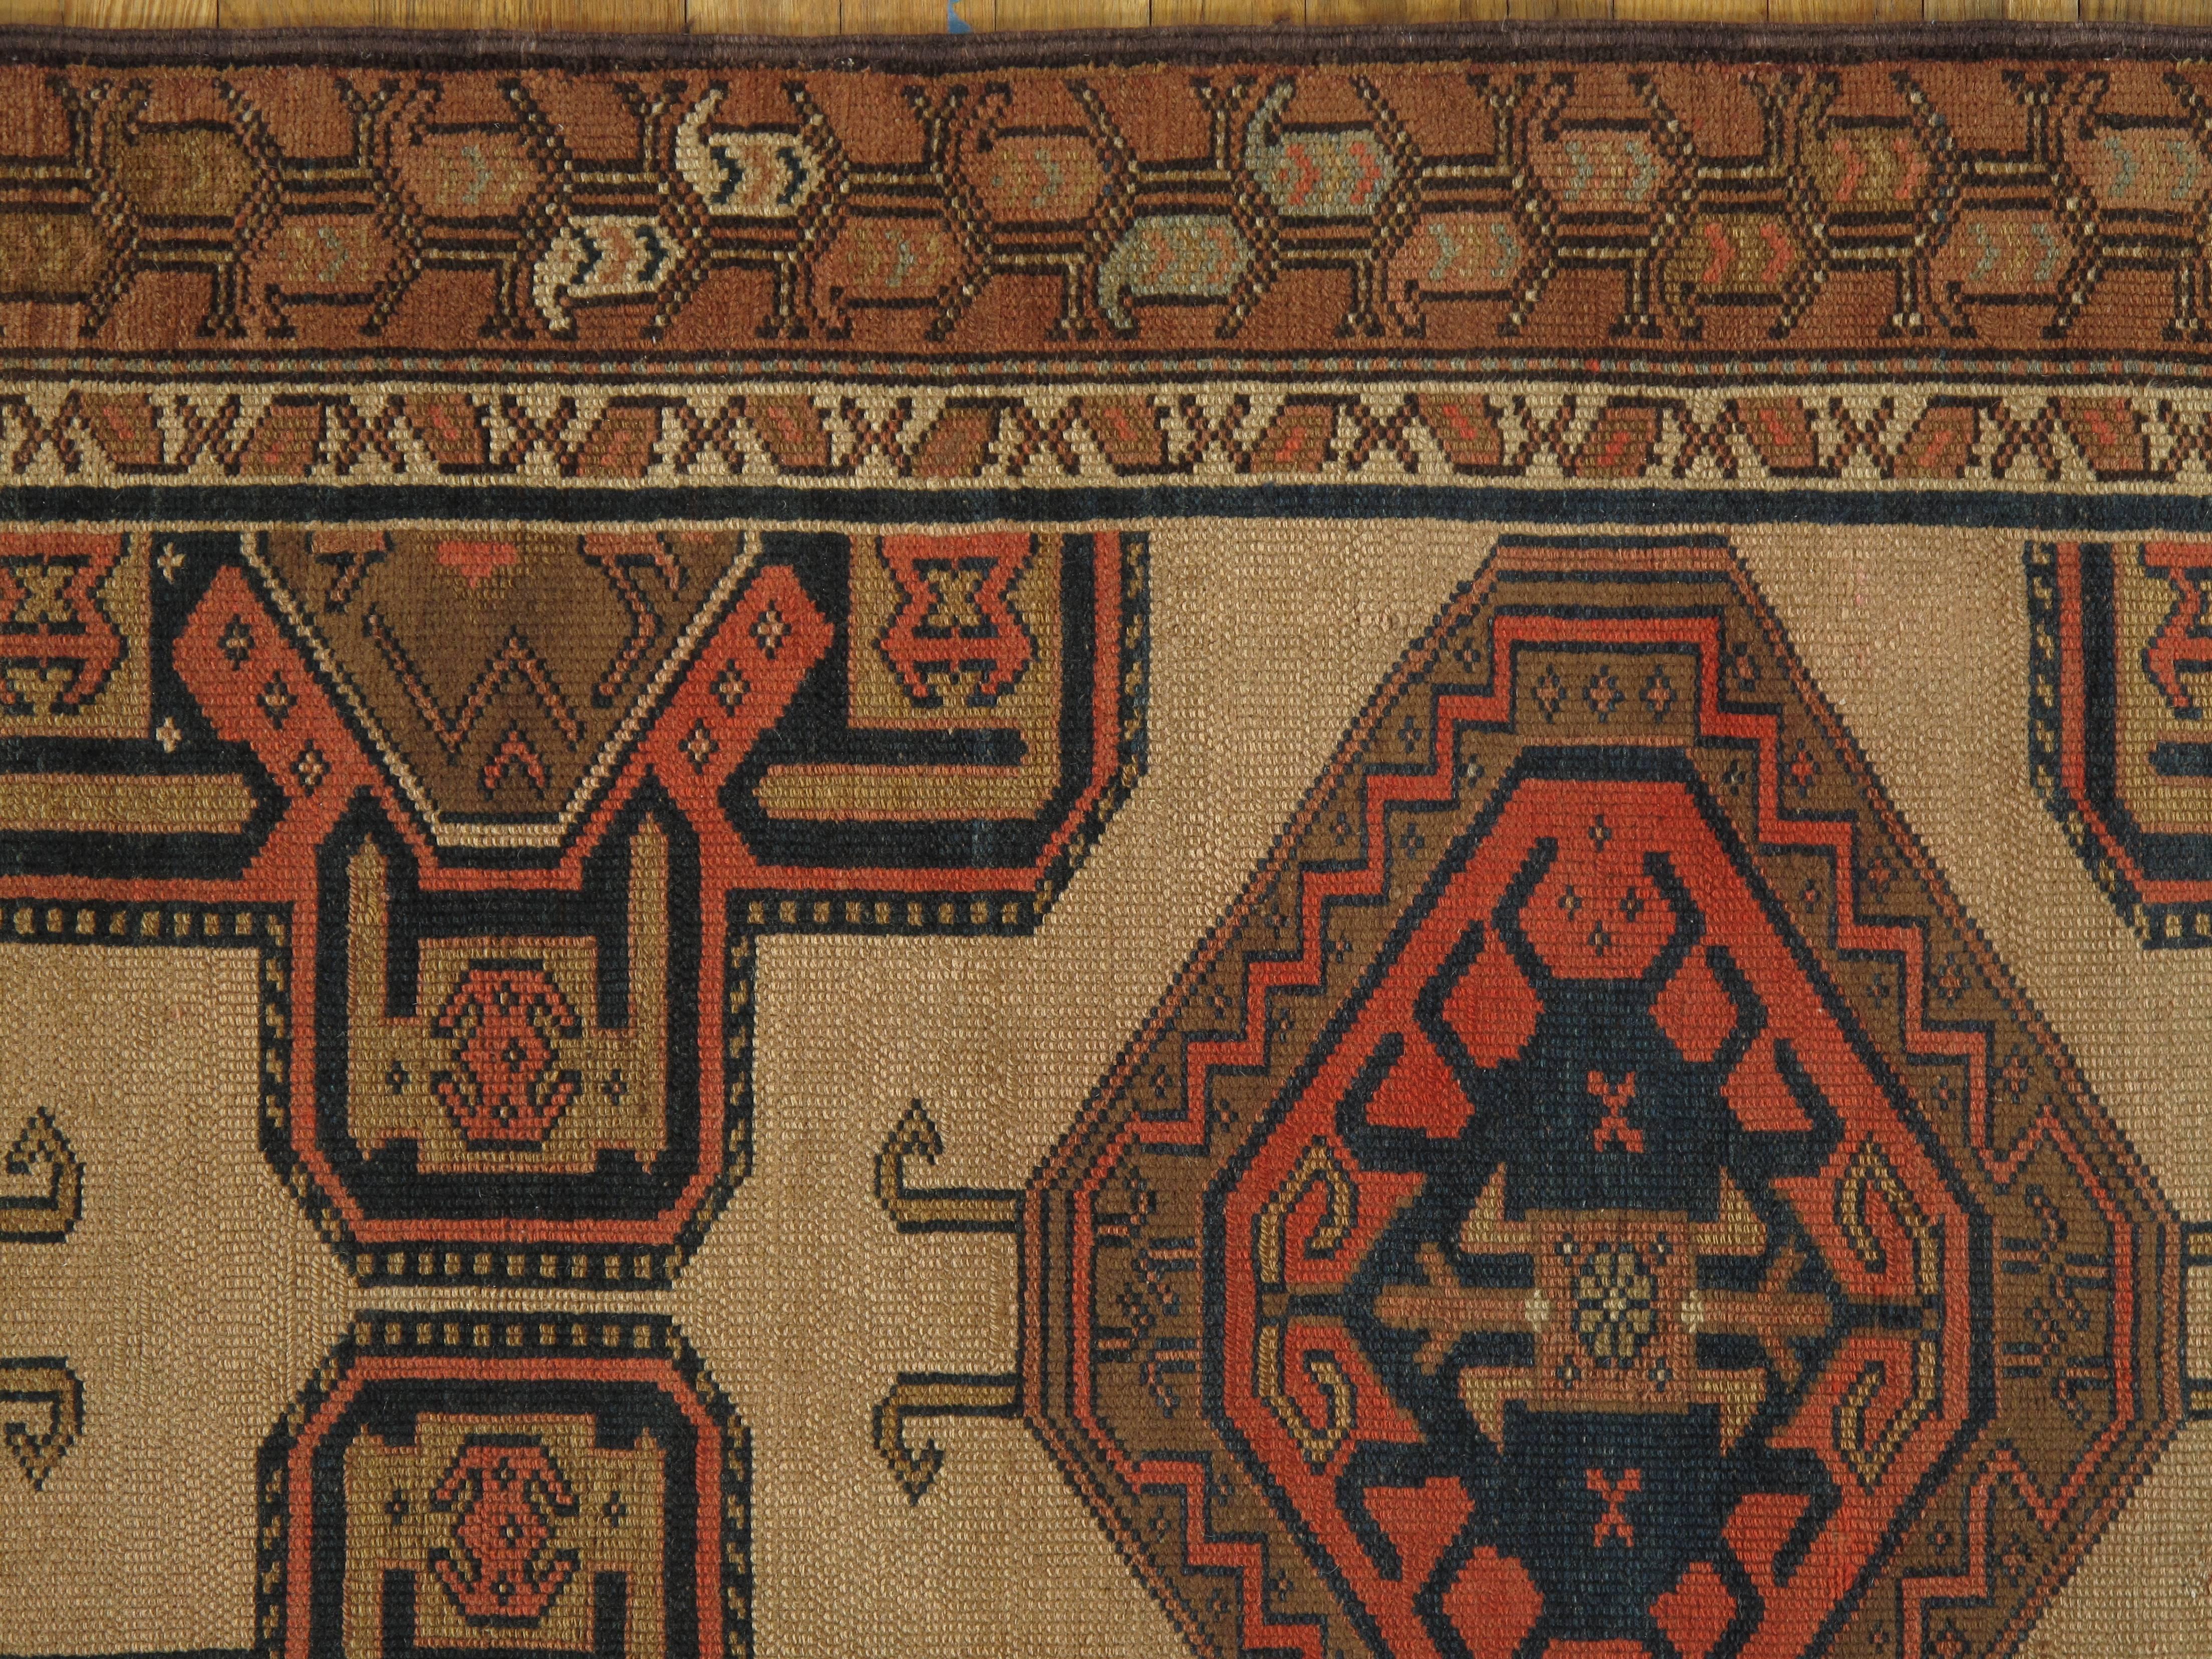 The village of Serab is known for their fine long runners with a characteristic camel ground and lozenge-shaped medallions. These rugs are woven in the village of Serab, located in the North West Region of Persia. Measures: 3'x15'2.
      